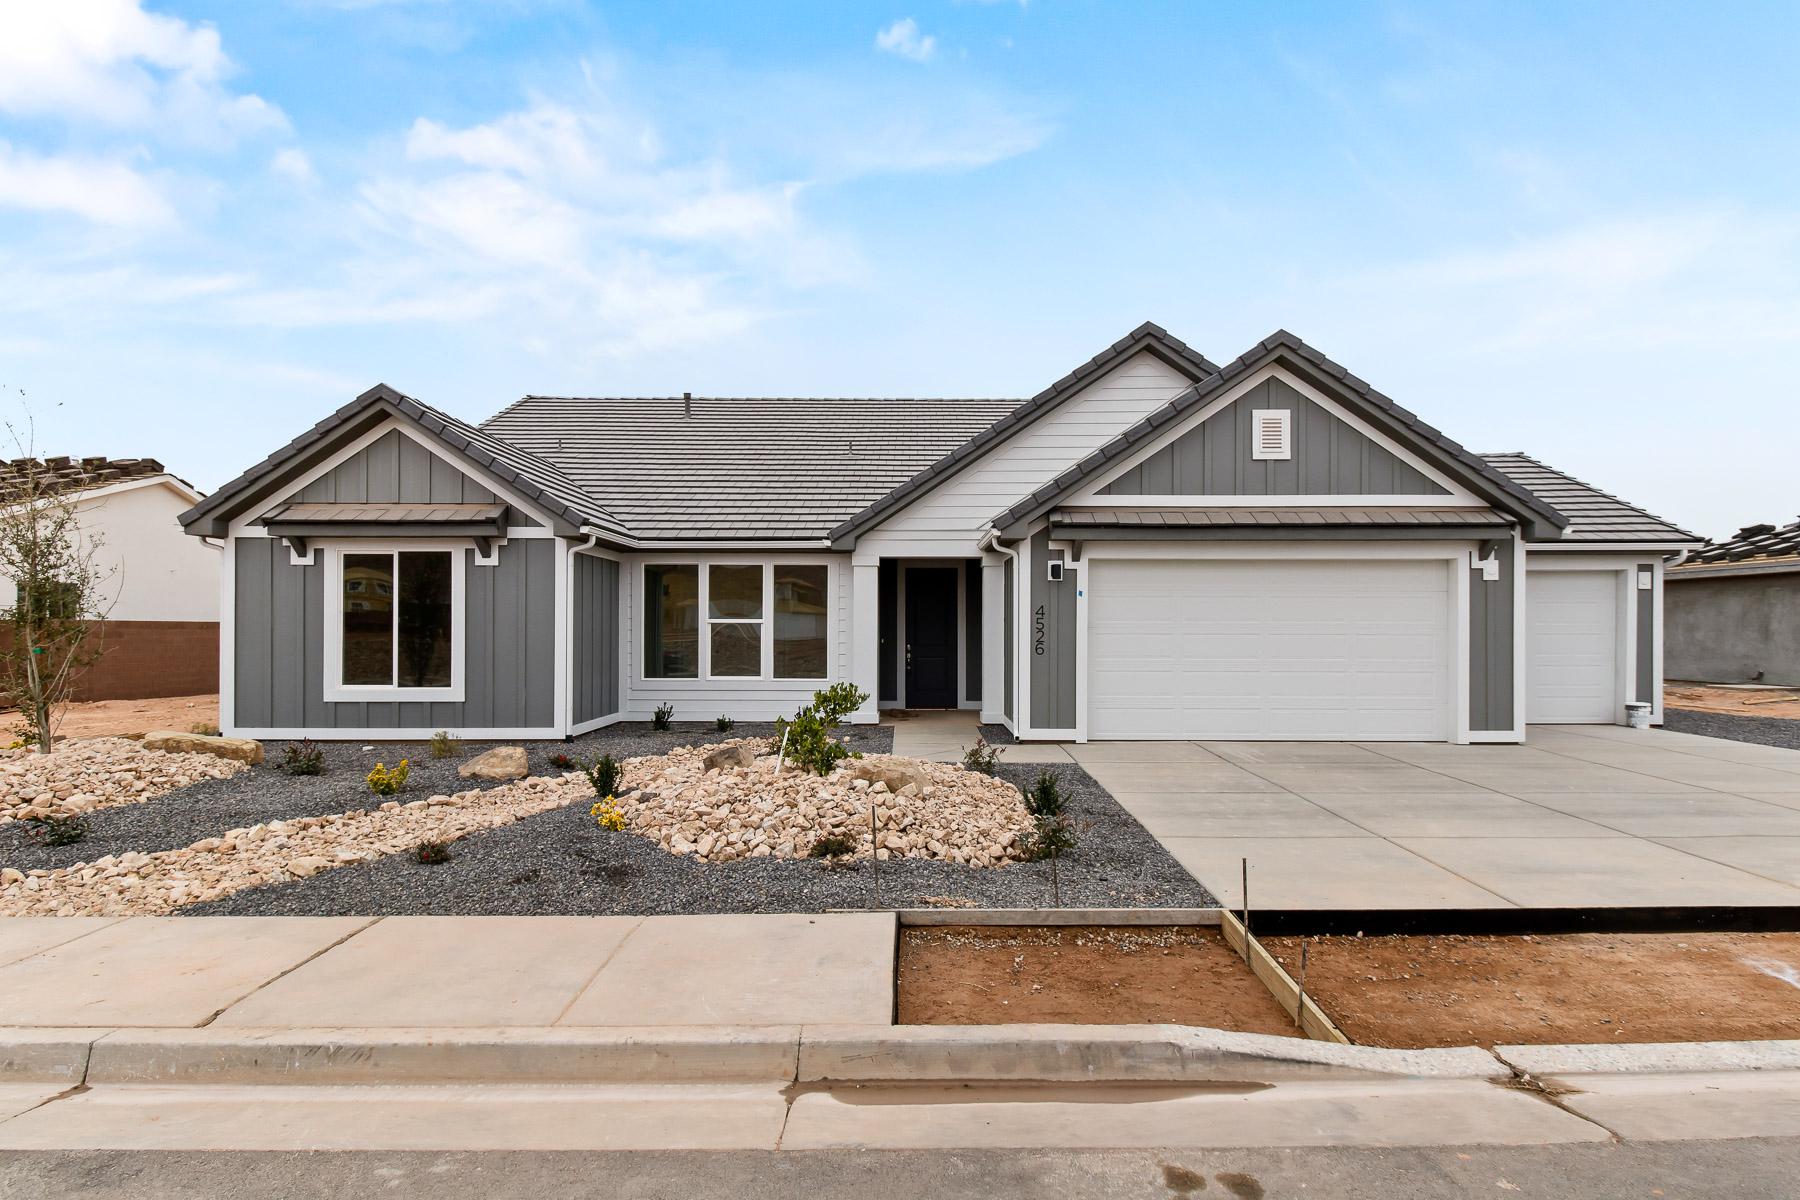 Exterior with Optional 3 Car Garage. 3br New Home in St. George, UT